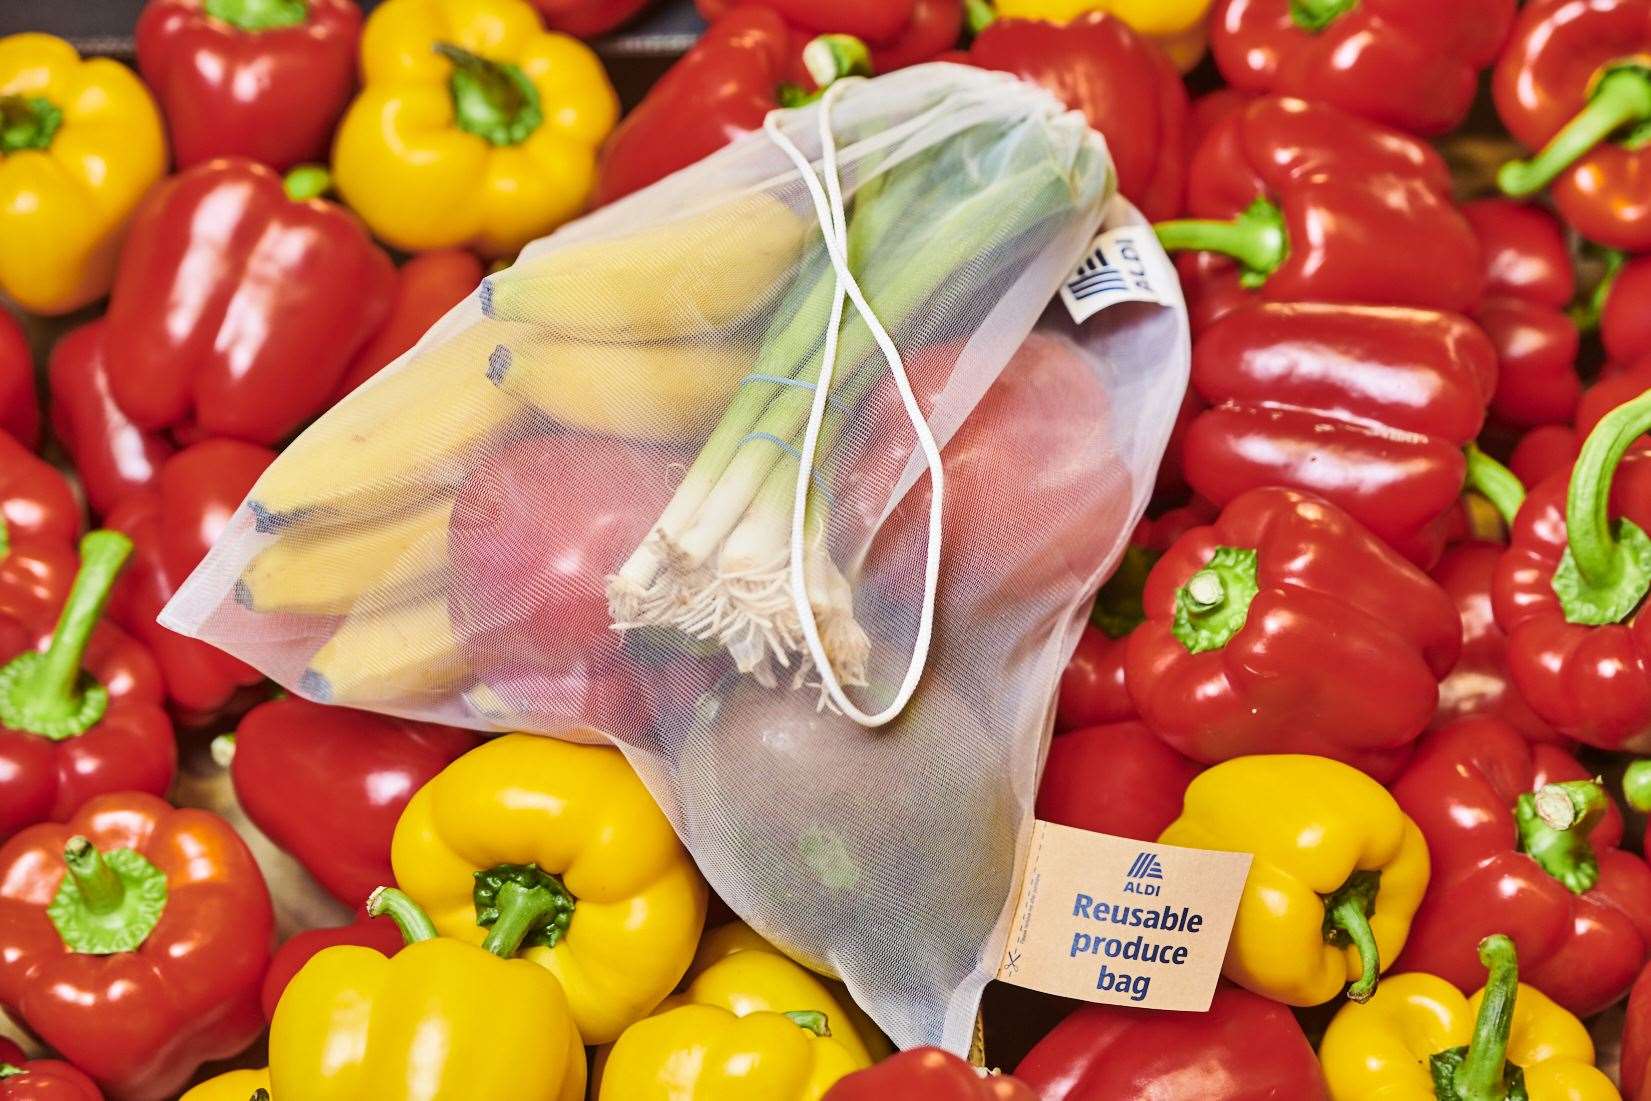 Aldi is trialling a reusable fruit and veg bag